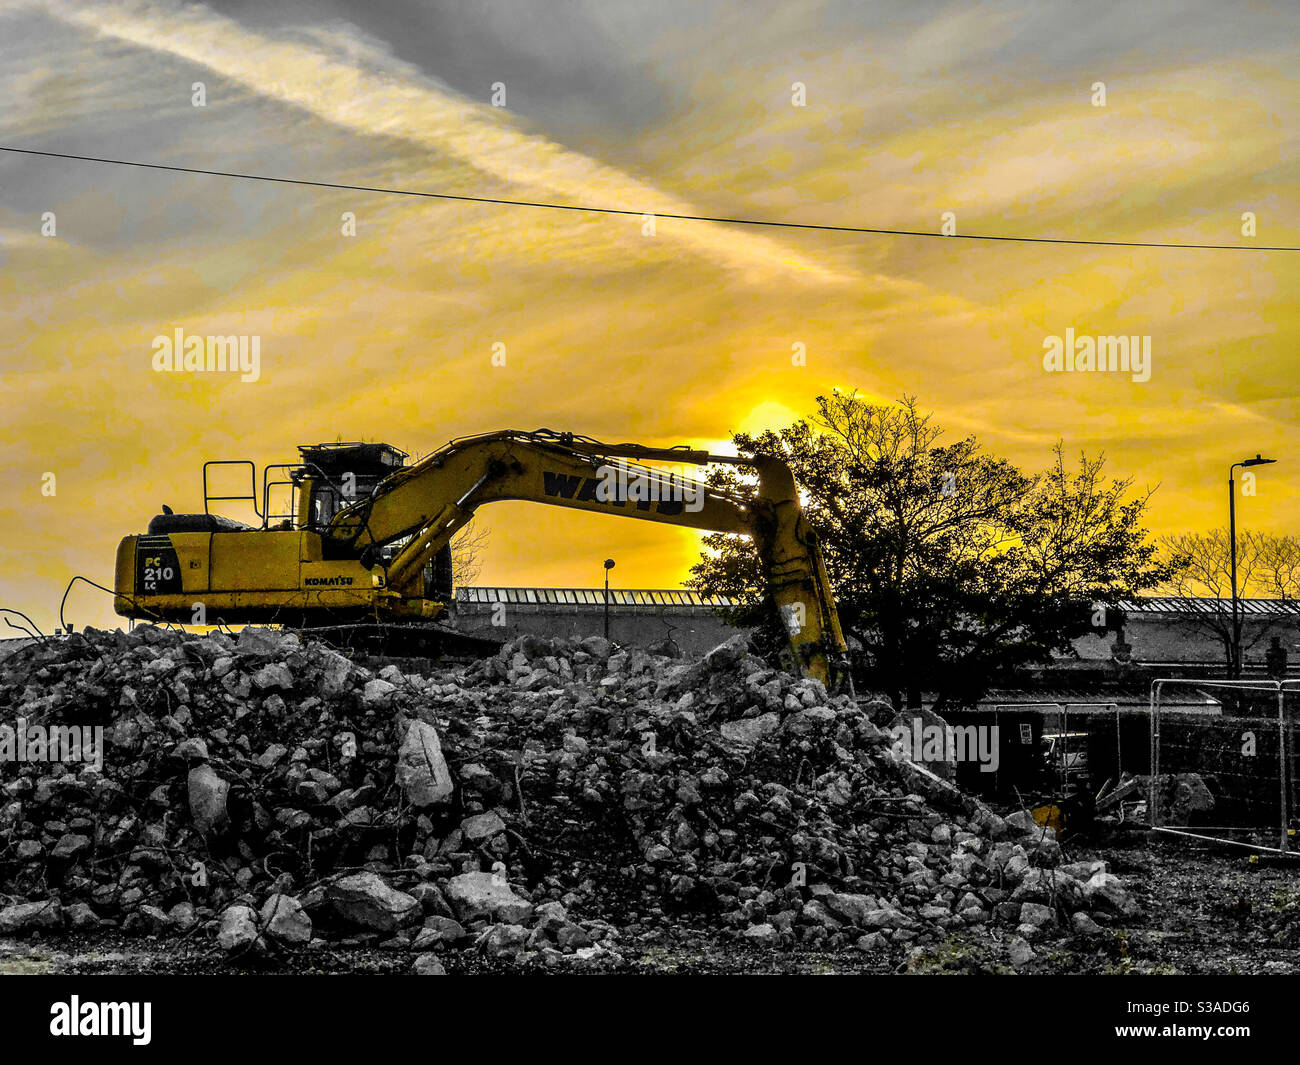 Excavator on top of a pile of rubble on a construction site with setting sun Stock Photo